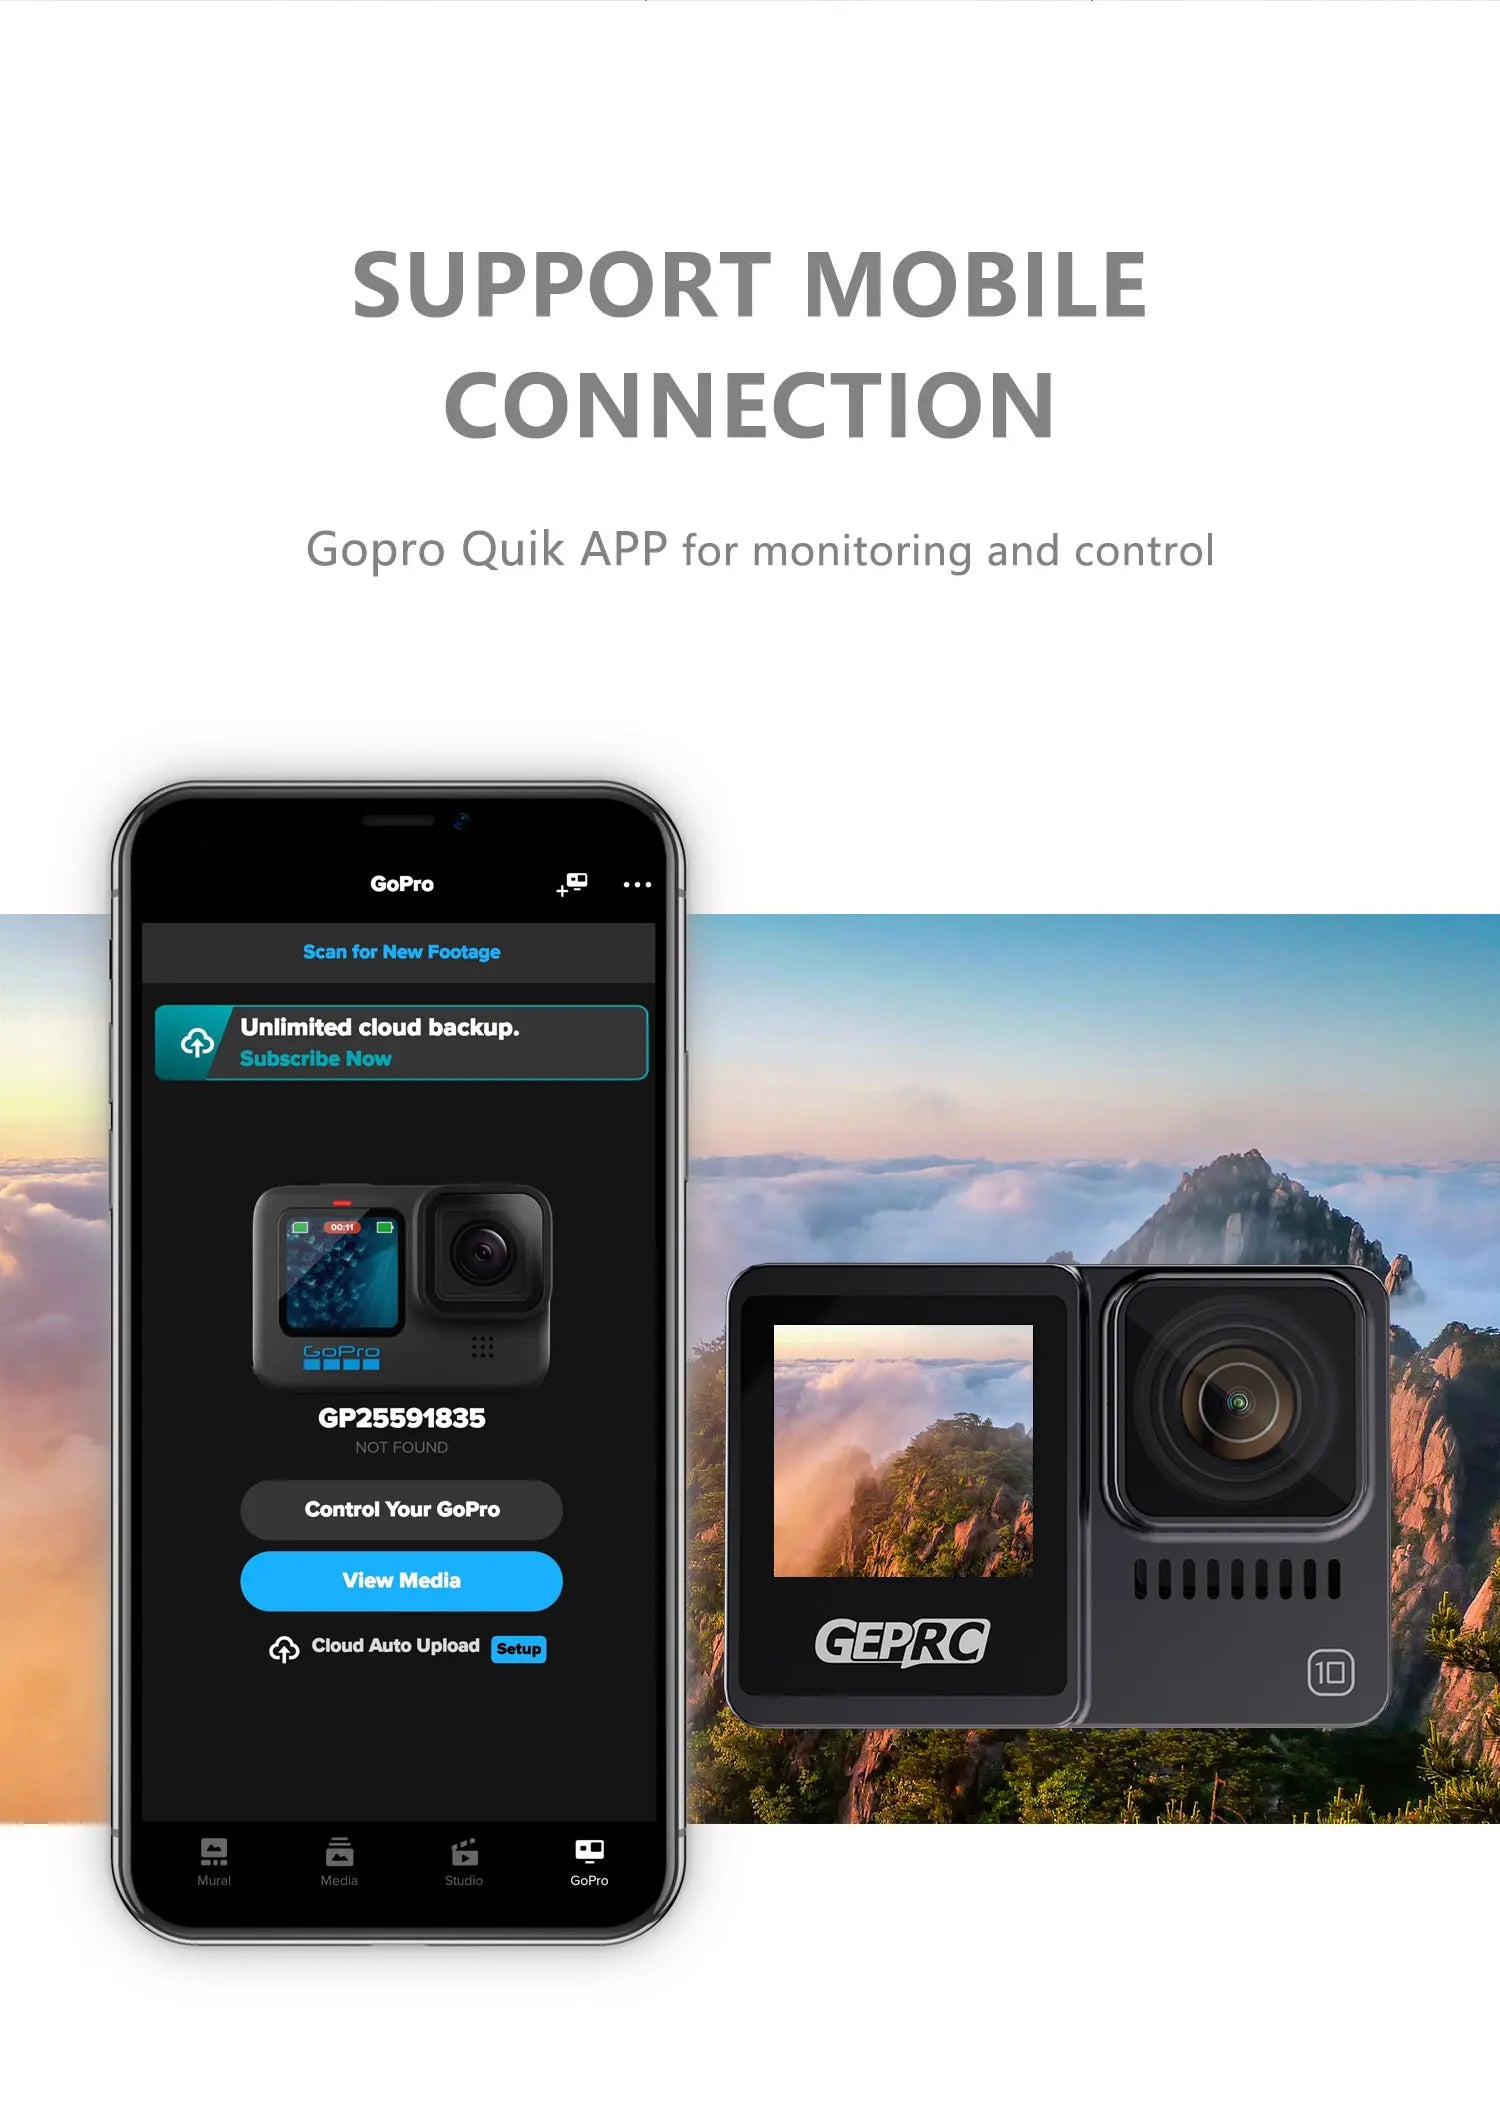 GEPRC Naked Camera, GoPro Quik APP for monitoring and control GoPro Scan for New Footage Unlimited